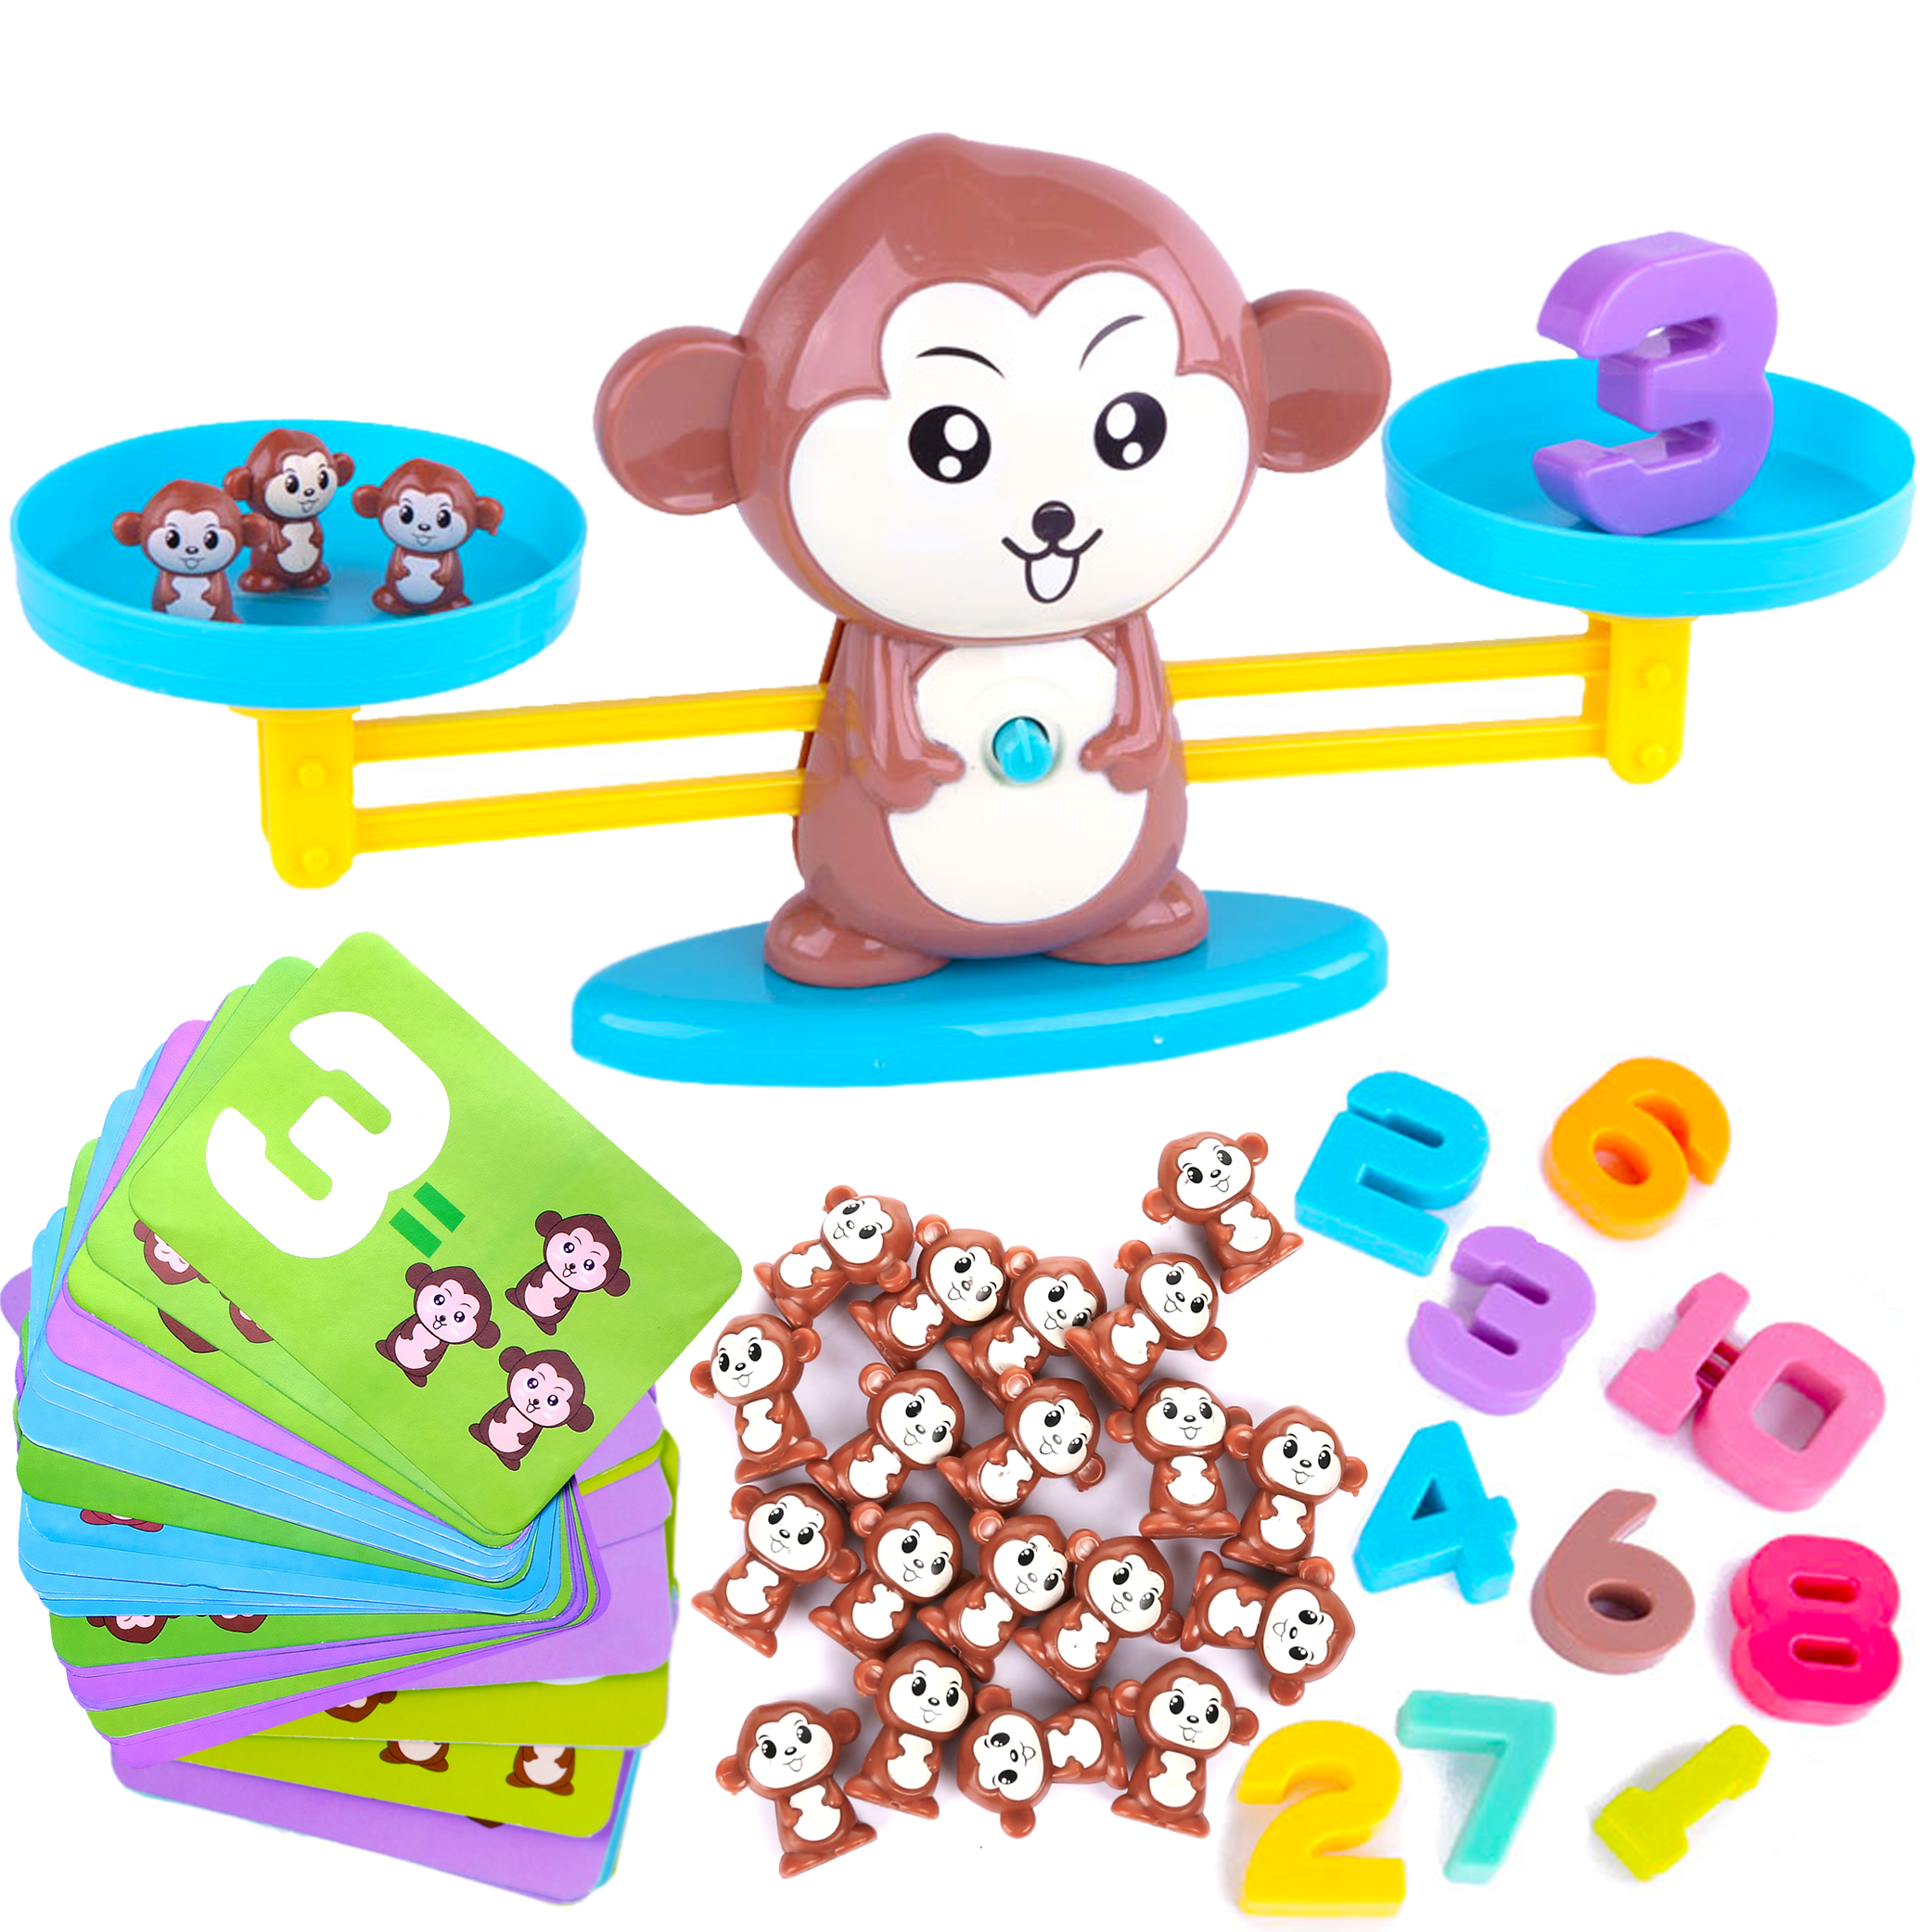 Cooltoys Monkey Balance Cool Math Game For Girls Boys Fun Educational Children S Gift Kids Toy Stem Learning Ages 3 65 Piece Set Walmart Com Walmart Com